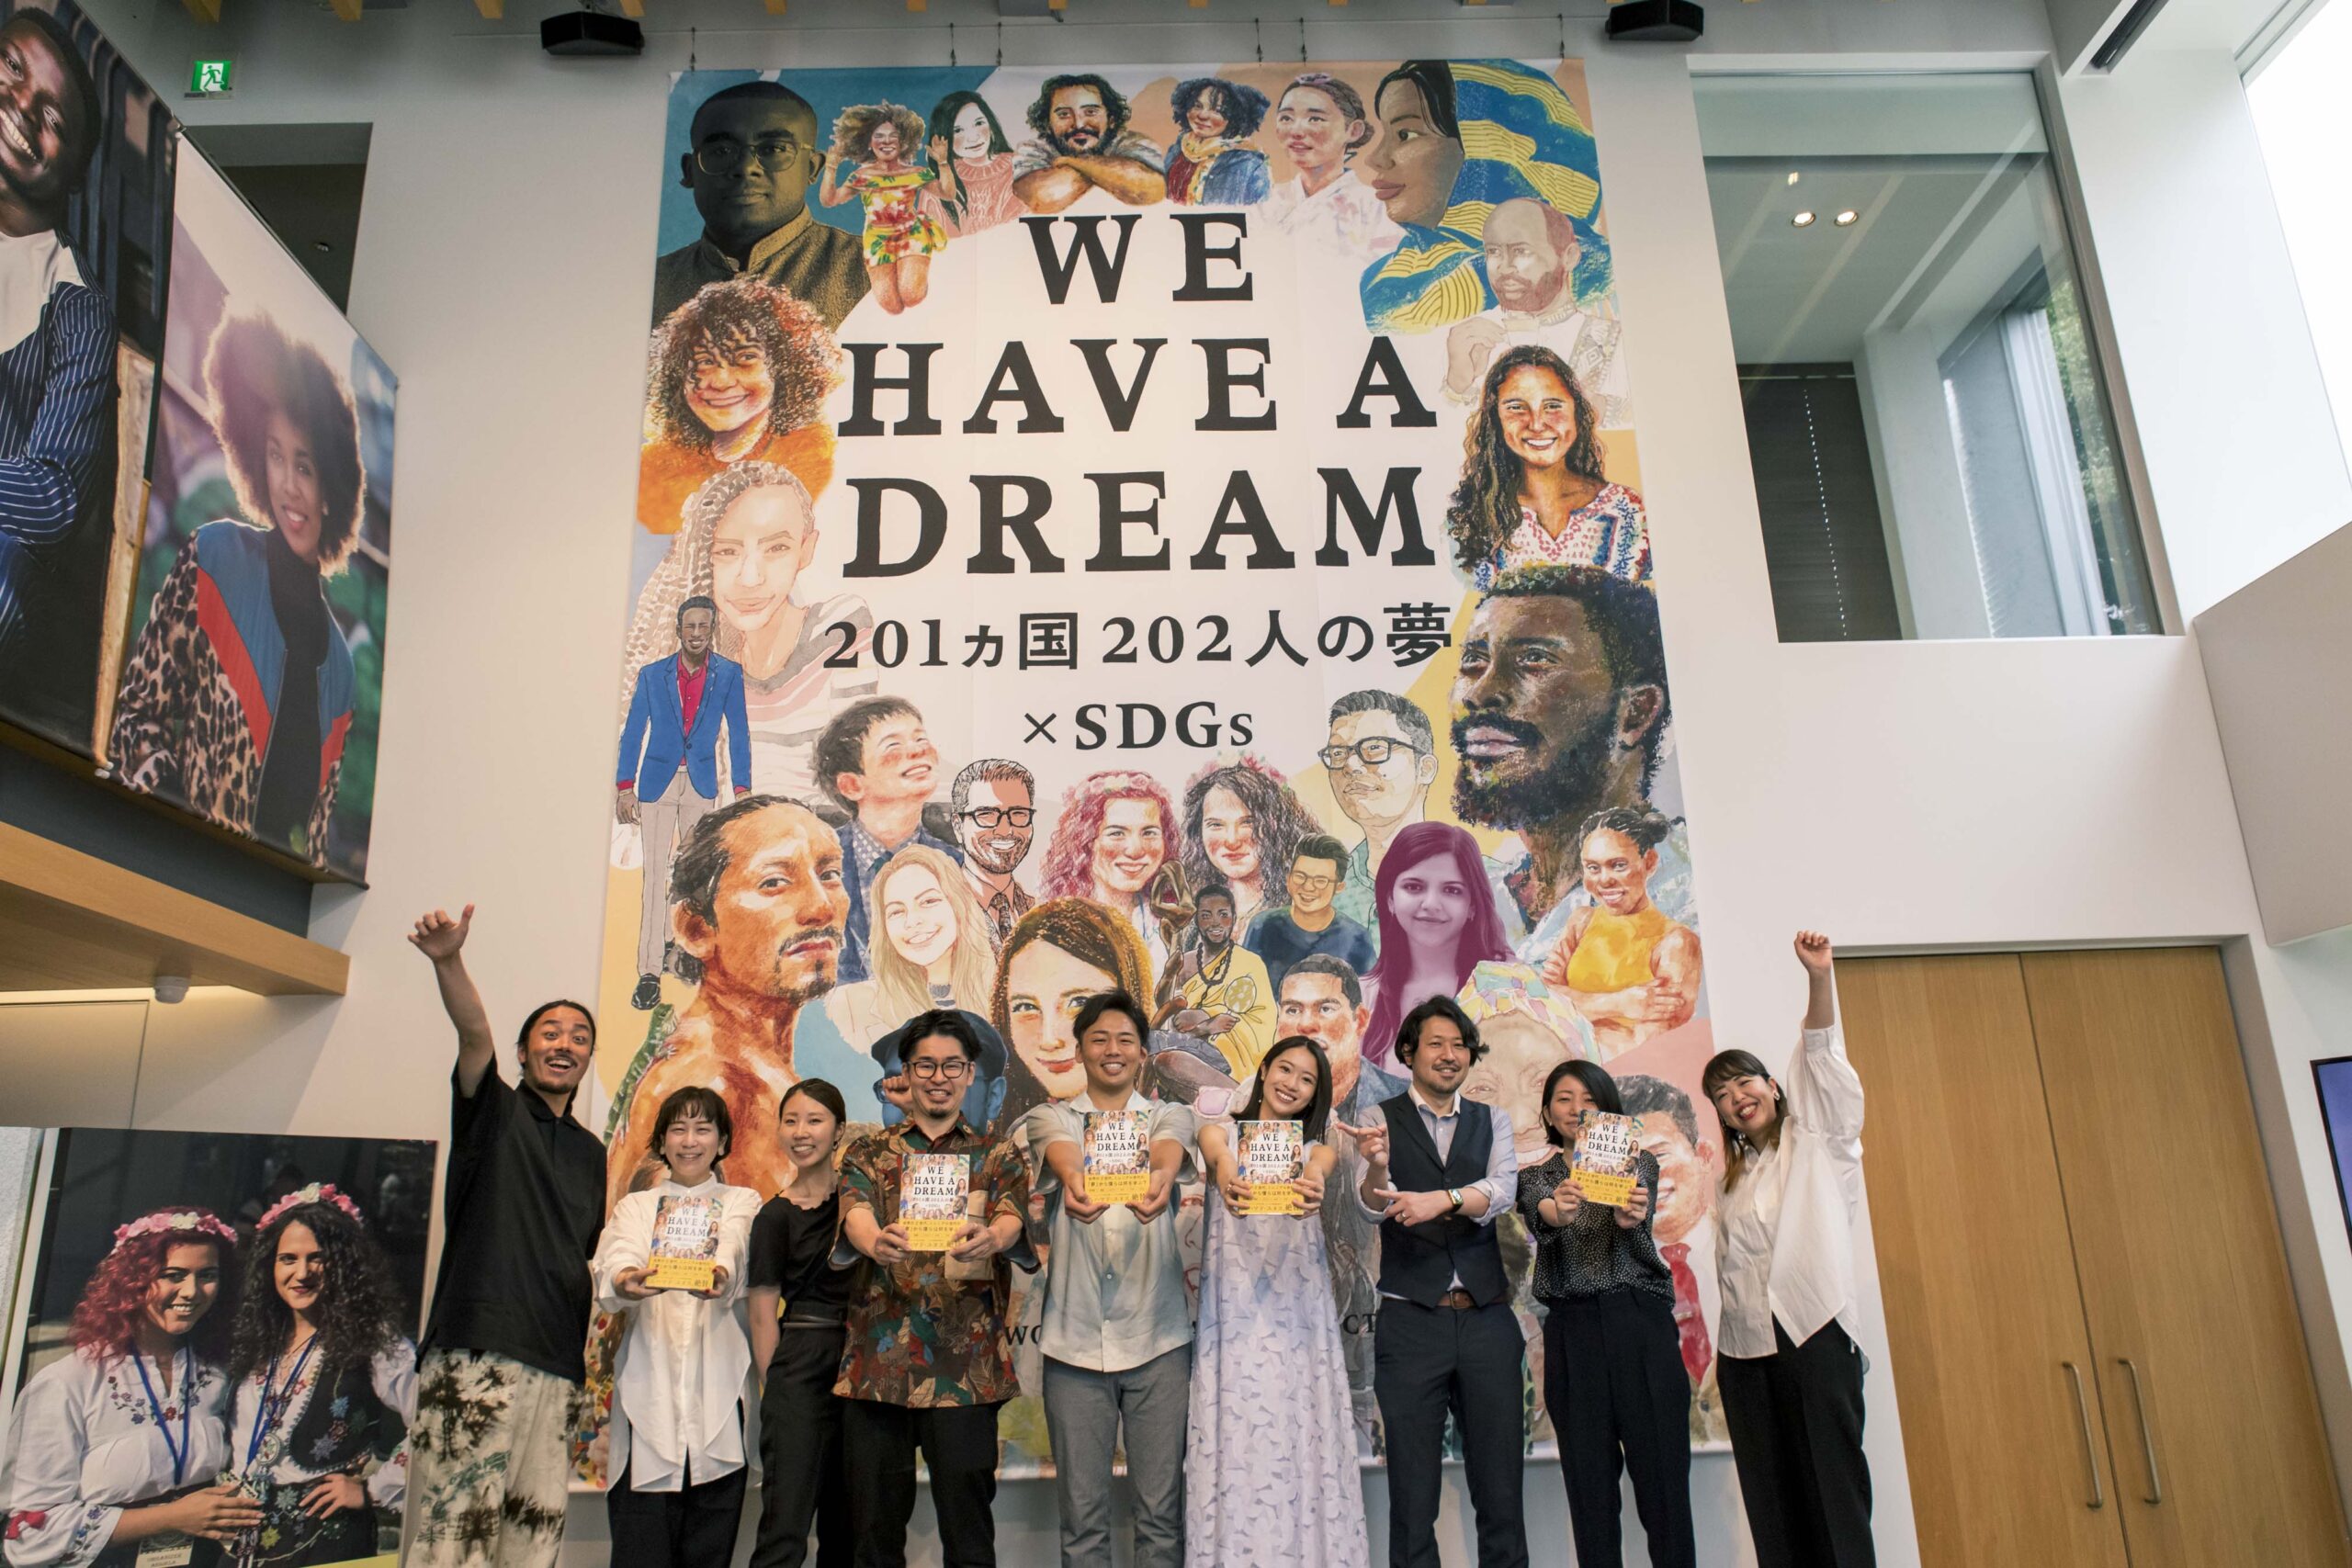 An image of the launch party for WE HAVE A DREAM with the publishing team standing before a large banner of the book cover